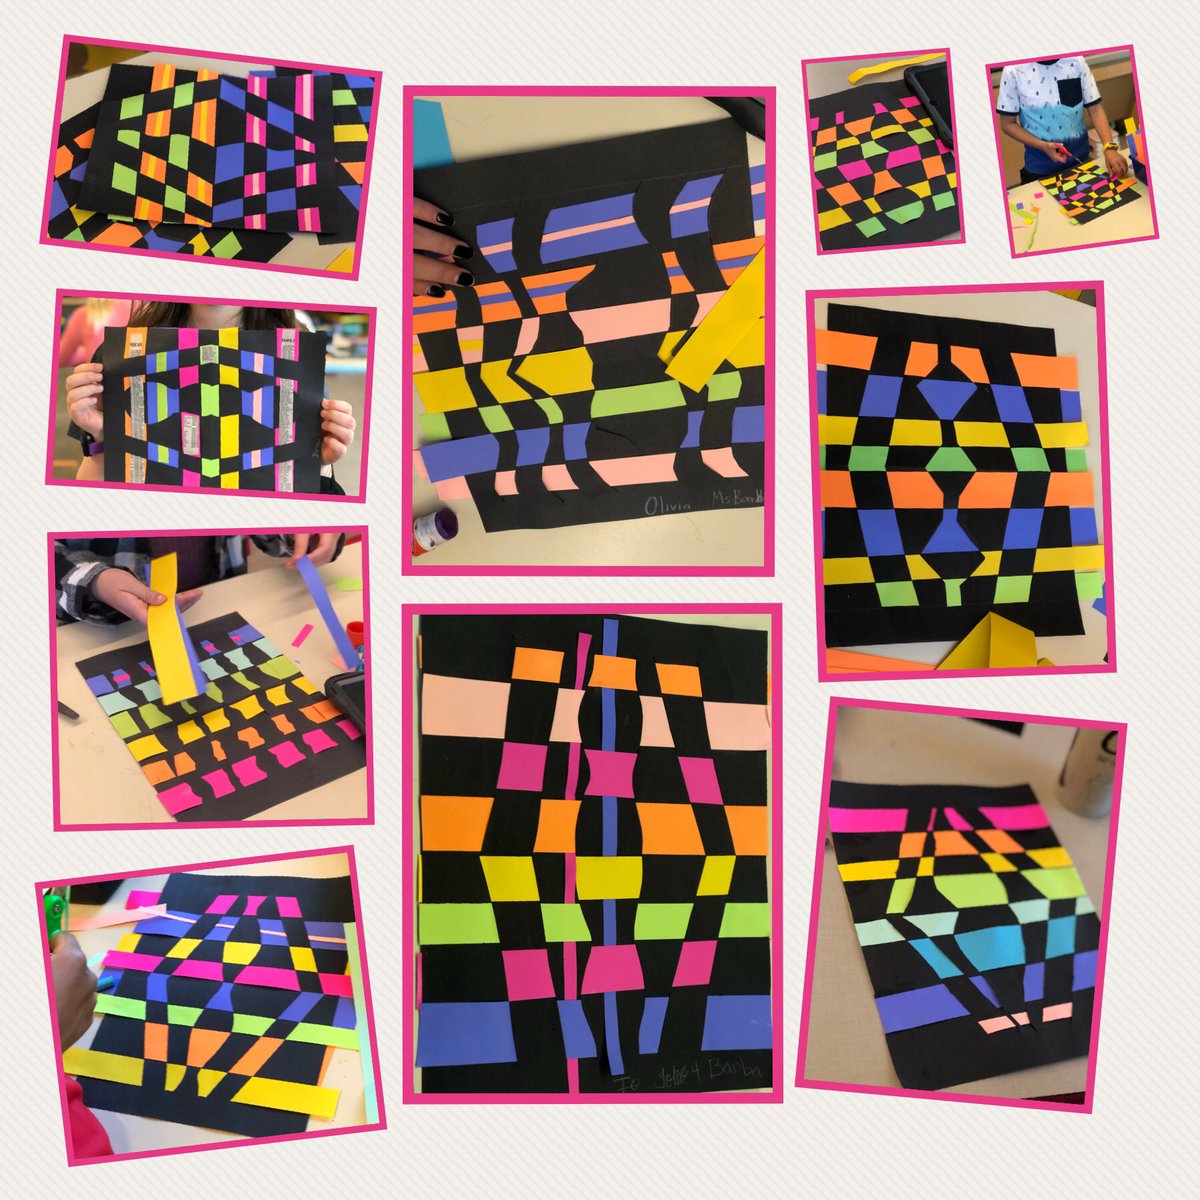 4th graders worked on improving their fine motor skills, patterning, hand and eye coordination and listening skills while doing paper weavings. <a target='_blank' href='http://twitter.com/APS_ATS'>@APS_ATS</a> <a target='_blank' href='http://twitter.com/APSArts'>@APSArts</a> <a target='_blank' href='http://twitter.com/MyRedCooper'>@MyRedCooper</a> <a target='_blank' href='http://twitter.com/ATS_4thGrade'>@ATS_4thGrade</a> <a target='_blank' href='https://t.co/UlT4r0V14u'>https://t.co/UlT4r0V14u</a>